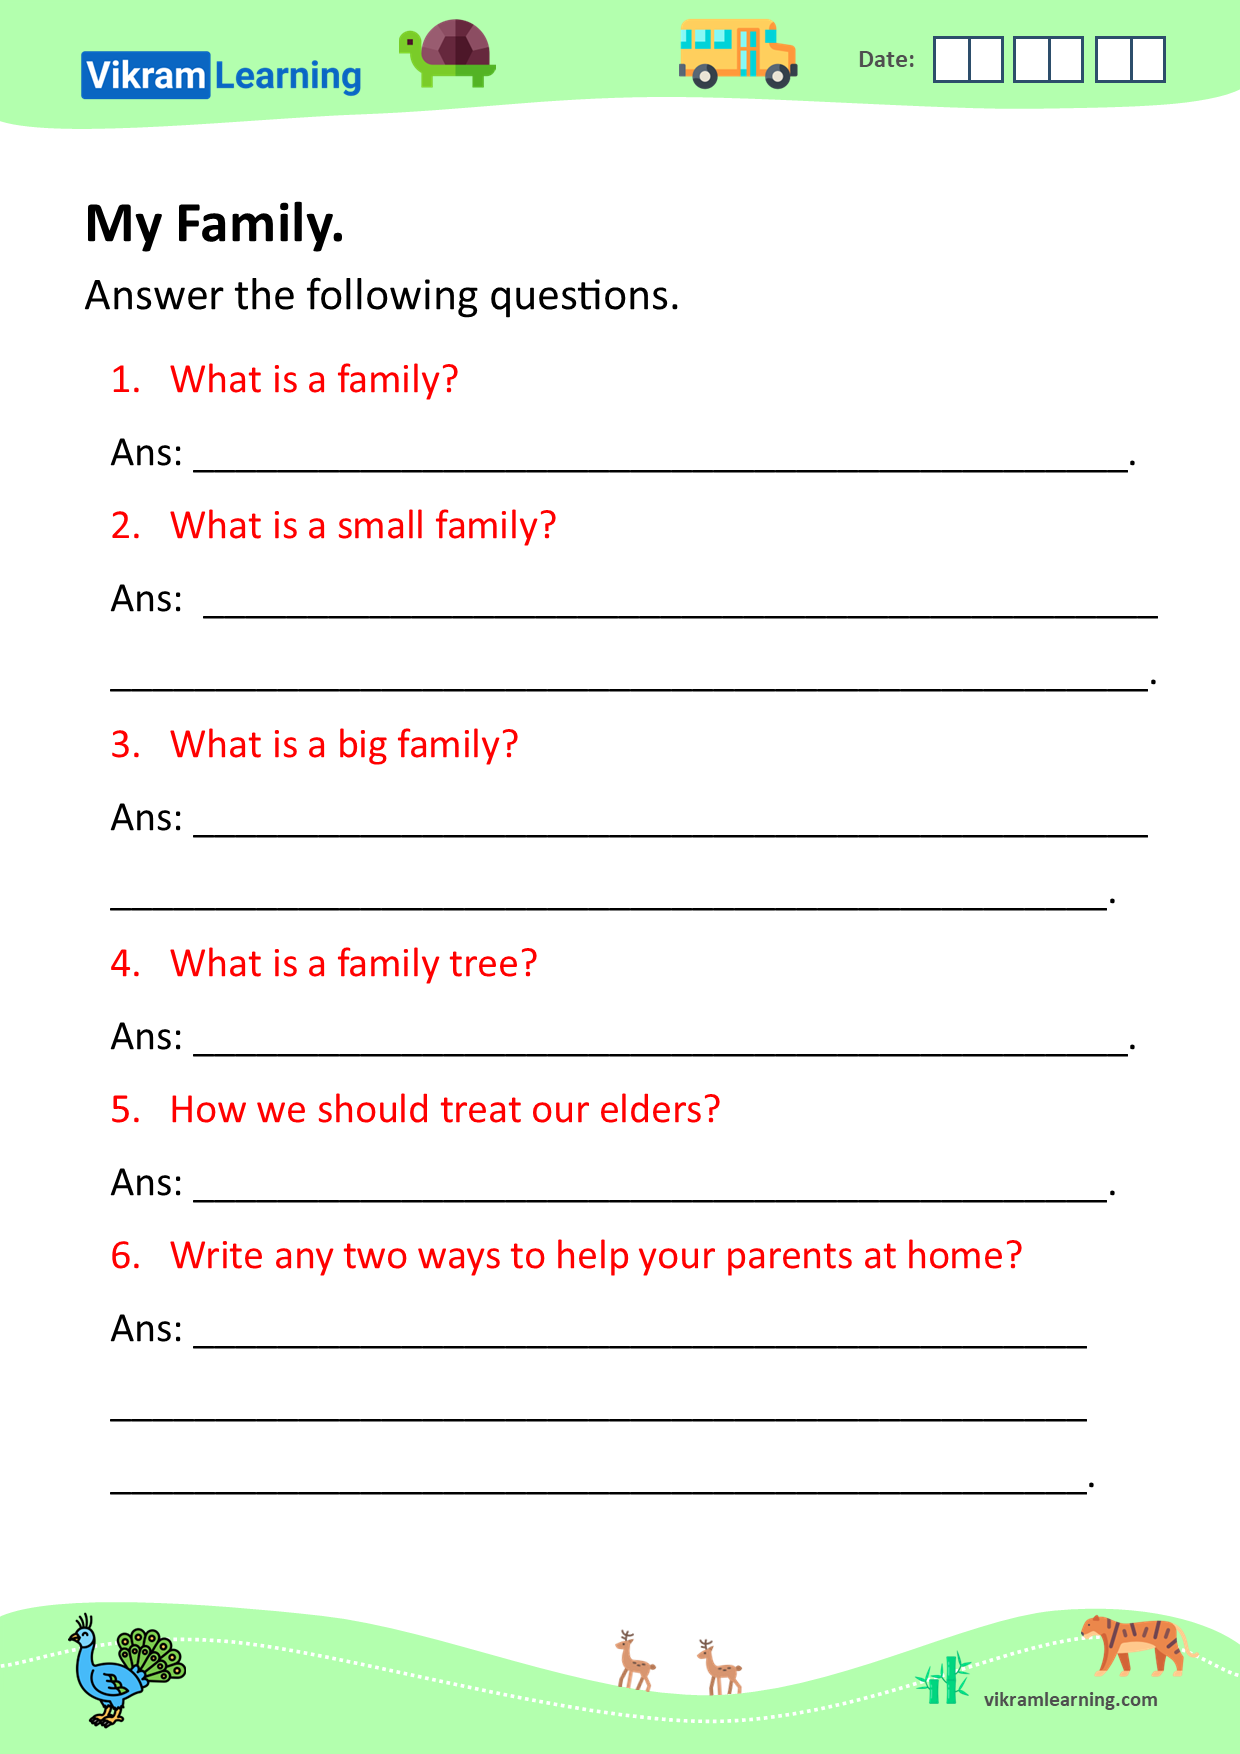 Download my family, types of families, and family tree worksheets